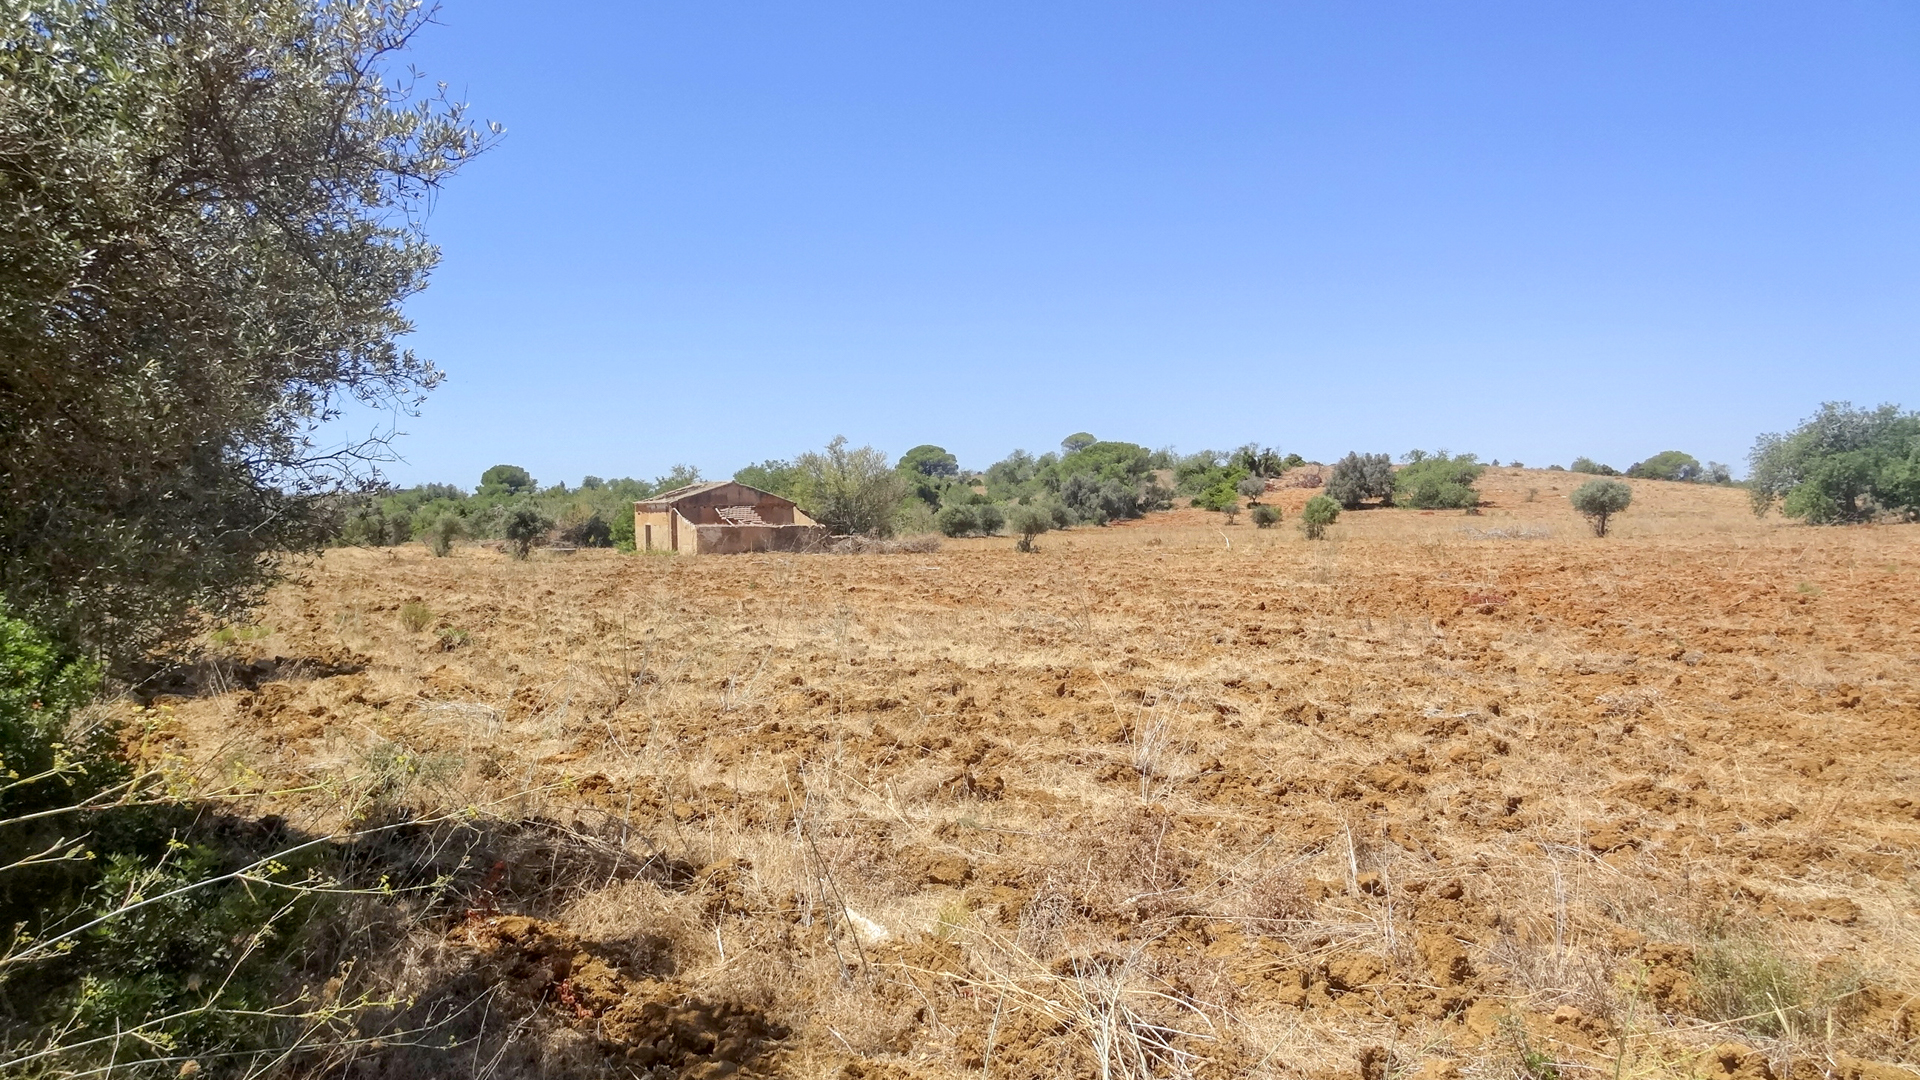 Large Plot of 36.705m² with Ruin and Sea Views near Guia | S5197 Big plot with sea views near Guia. The plot has 40.000m² and a ruin of 300m² living space. There is a natural water well which could be converted into a borehole. The plot would be perfect for horses.